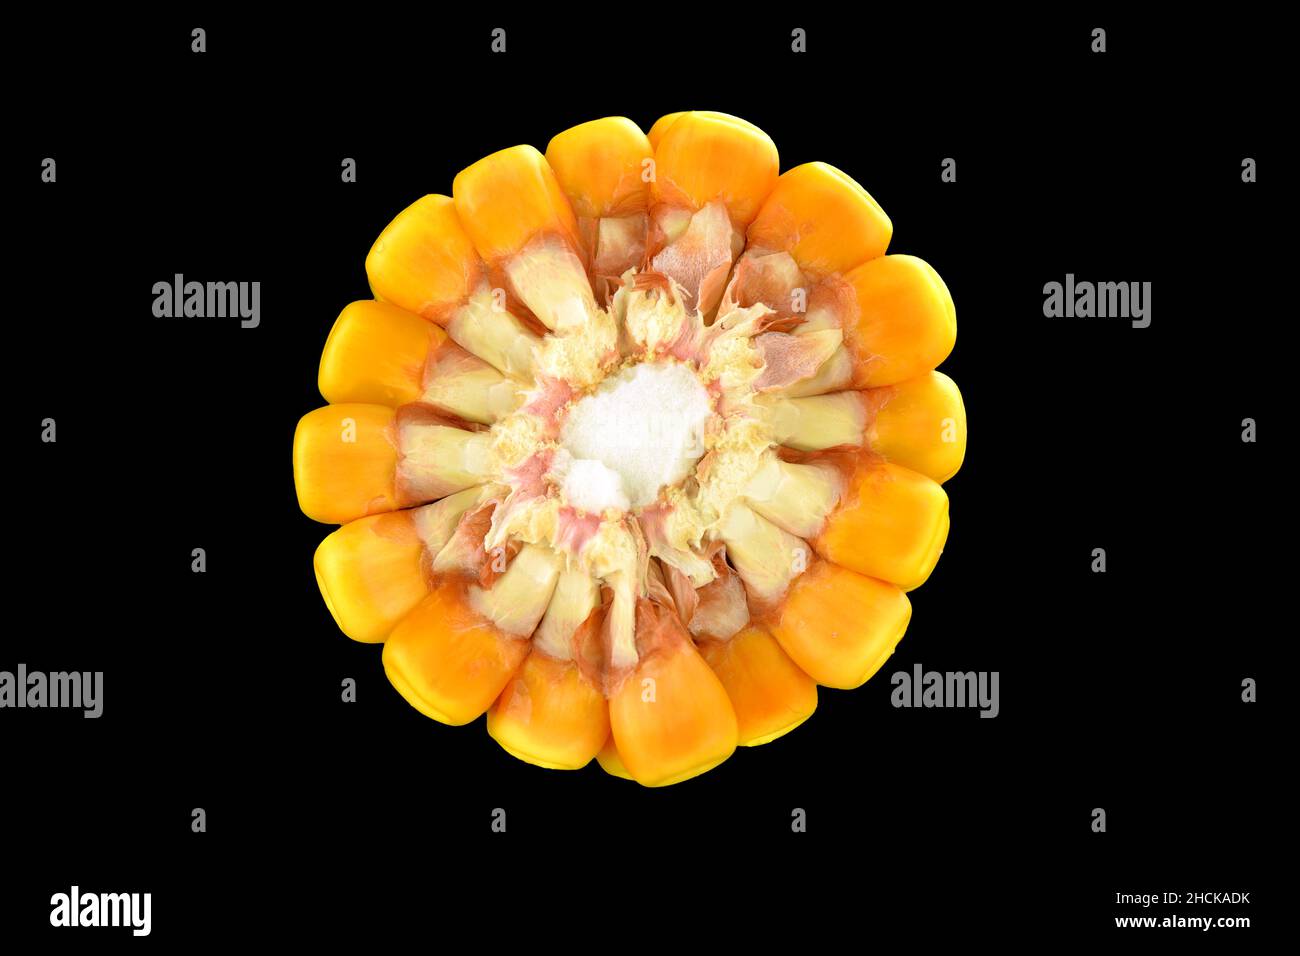 Corn cross section isolated on black background Stock Photo